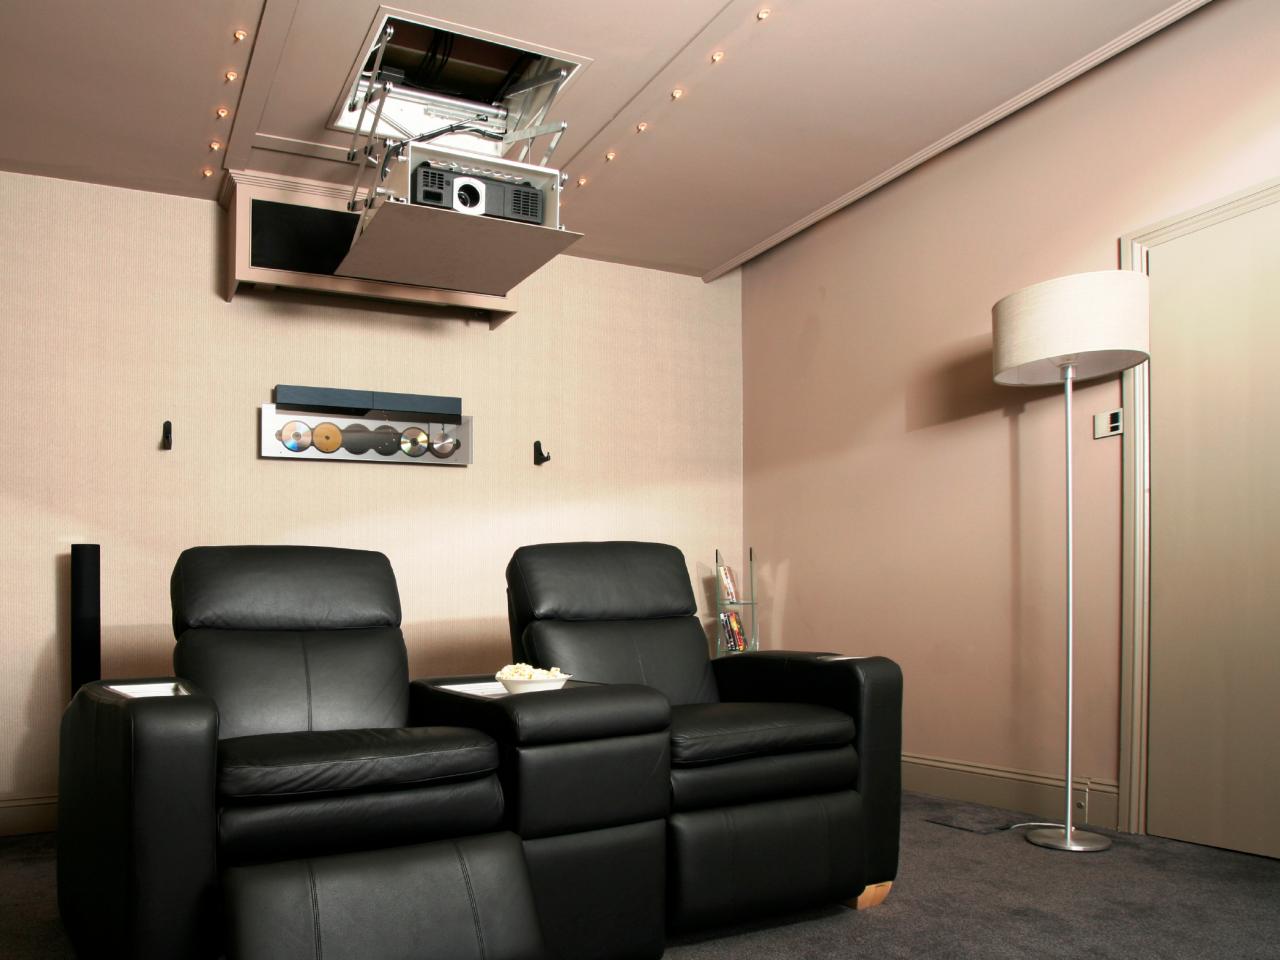 Setting Up an Audio System in a Media Room or Home Theater | DIY